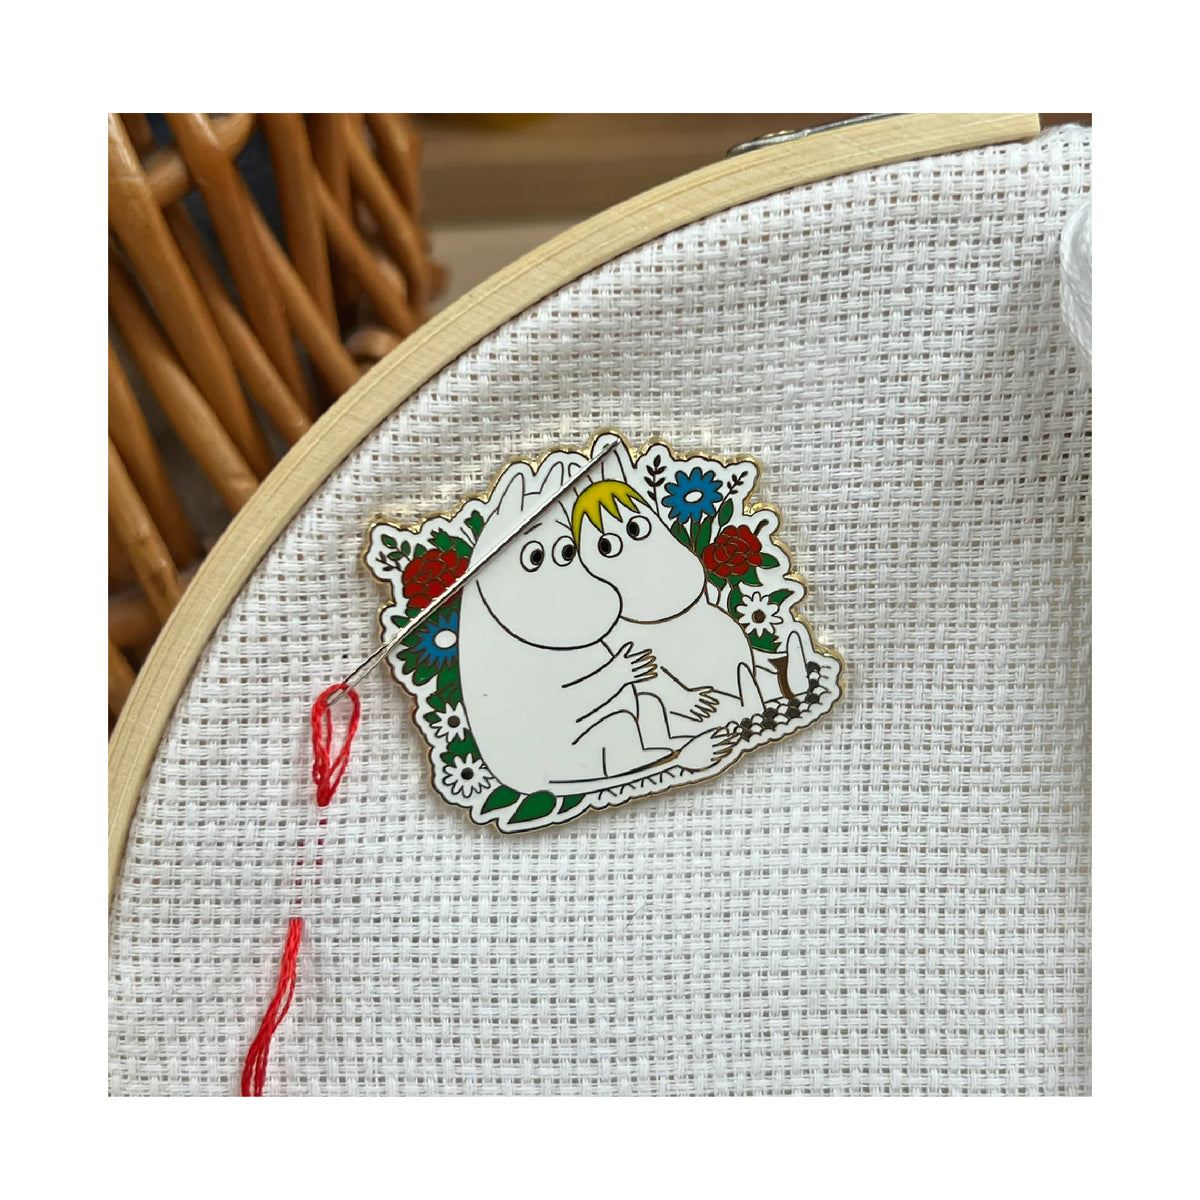 Moomintroll And Snorkmaiden Needle Minder